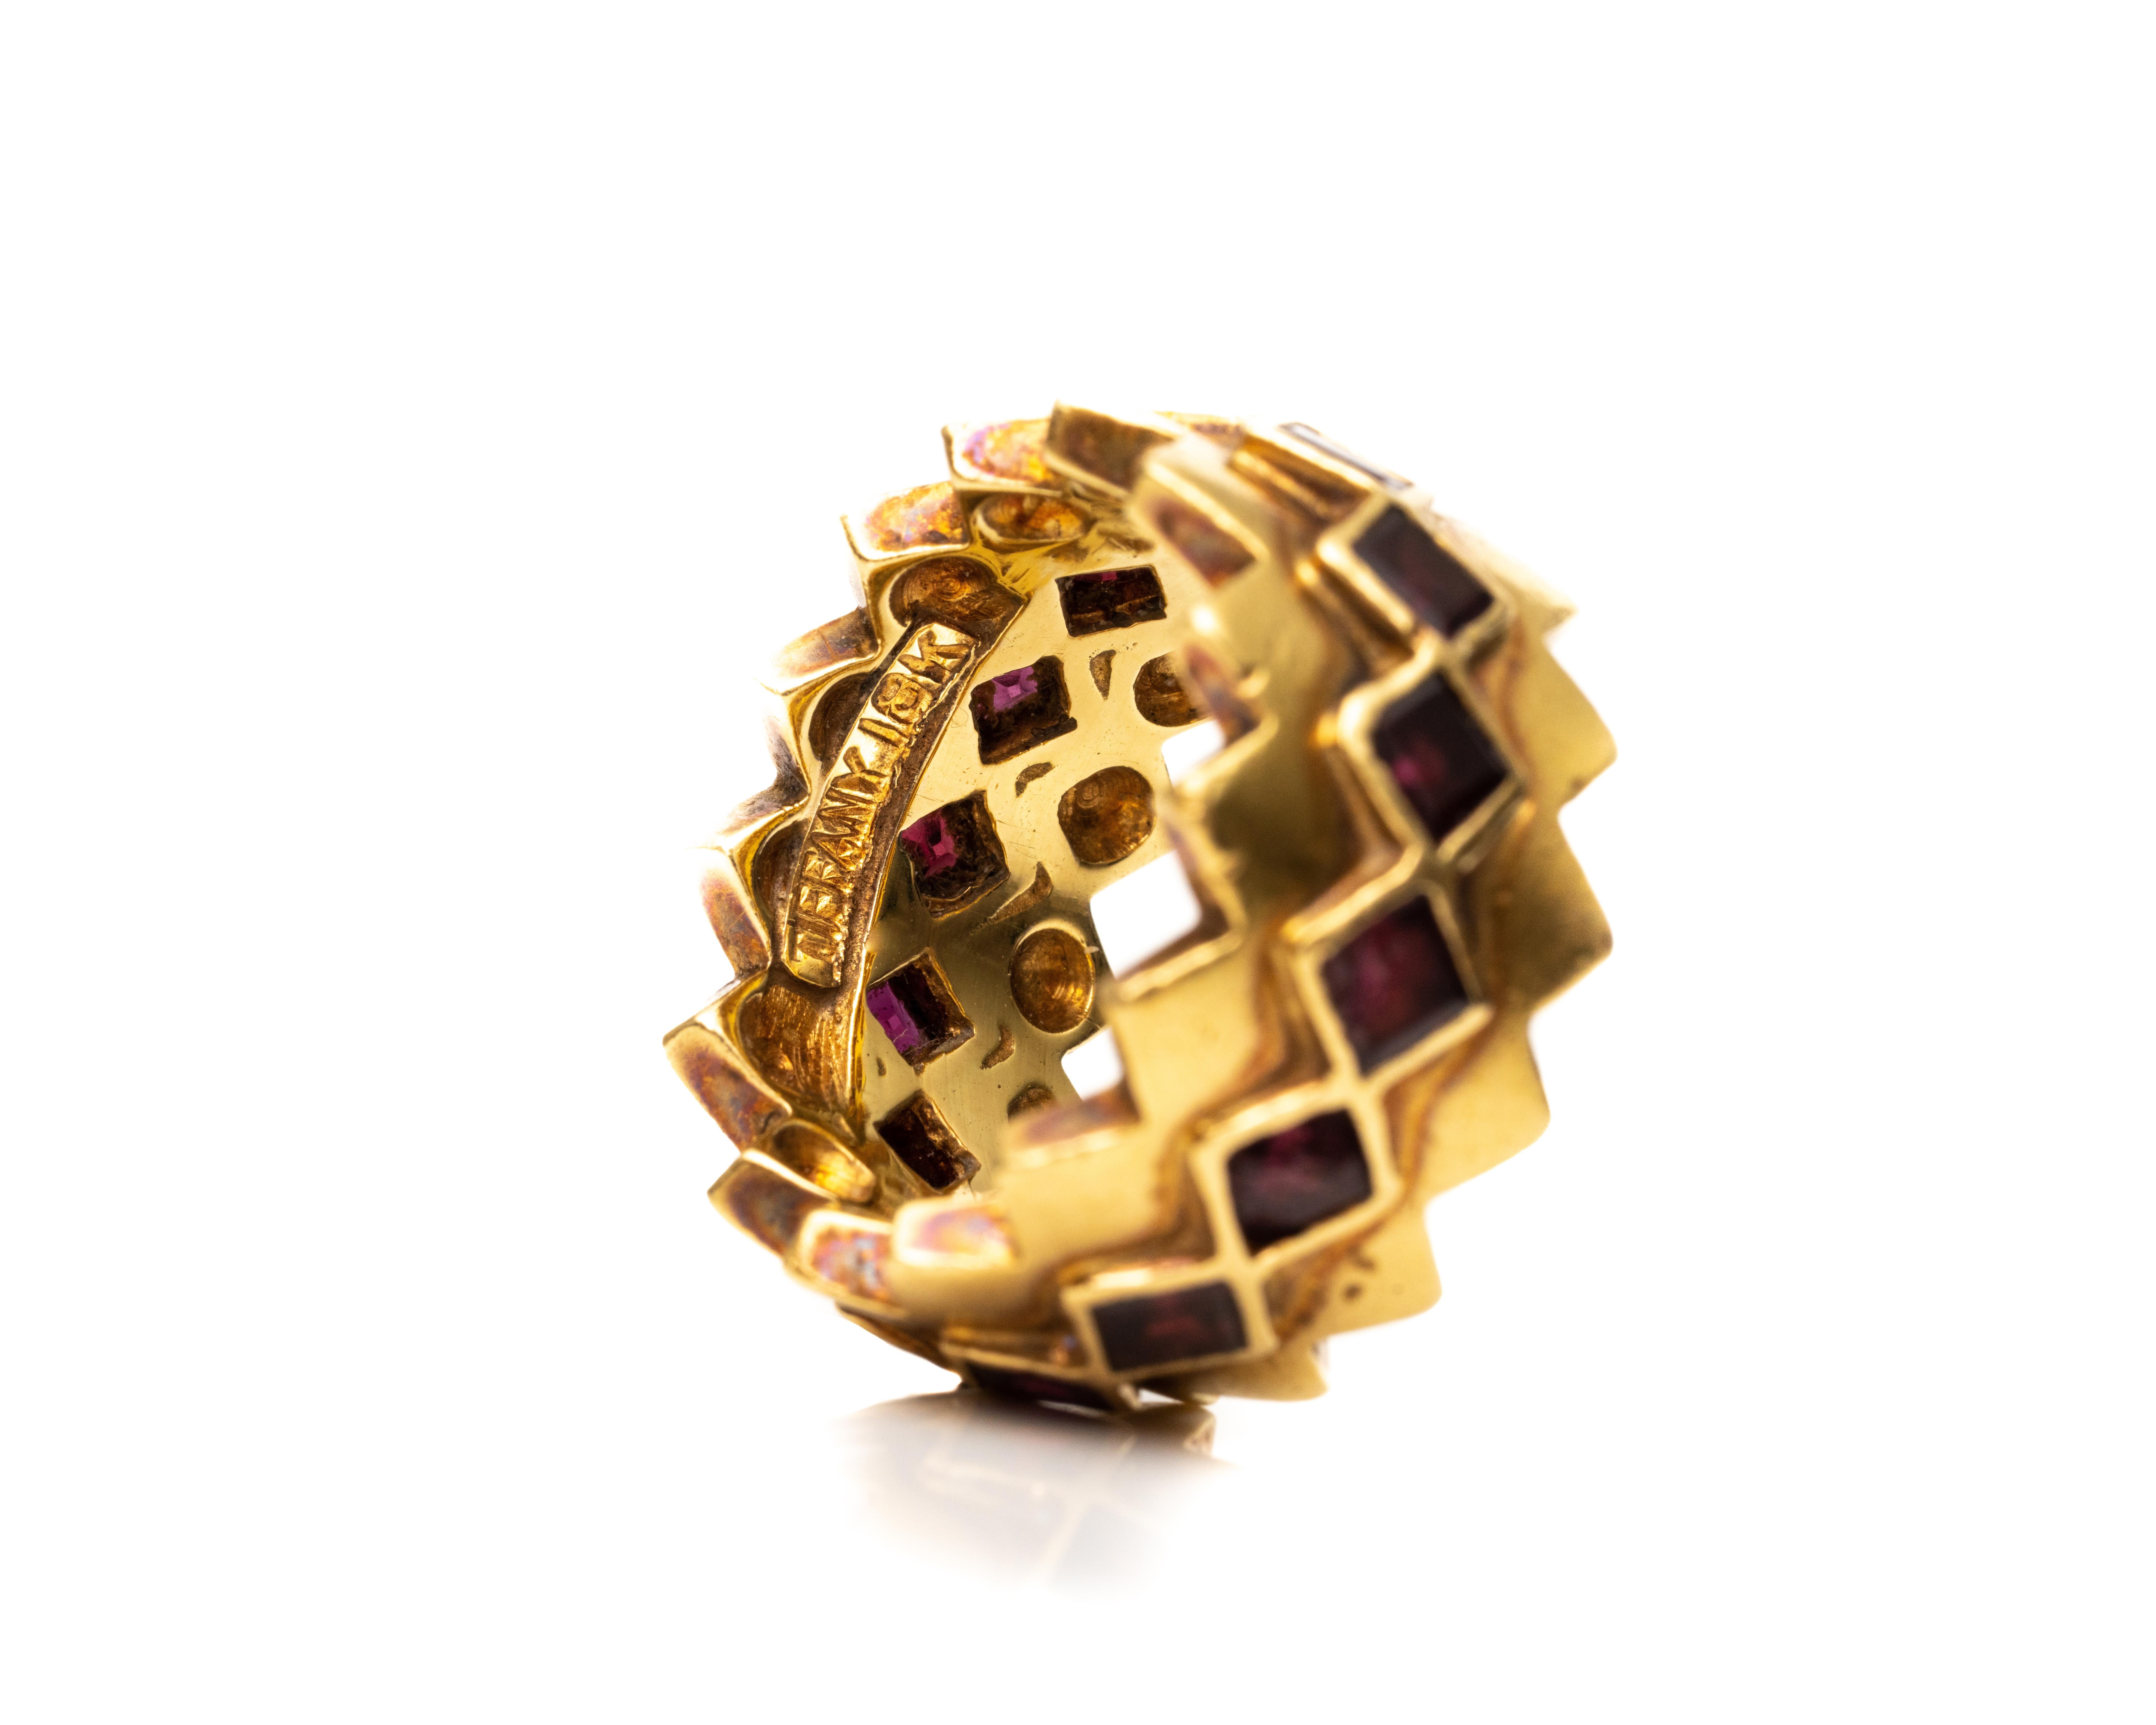 Ring Details:
Metal type: 18 Karat Yellow Gold
Size: 6.5 (not sizable)
Weight: 15 grams

Features square cut Garnets going all the way around and has a unique design overall.
The striking contrast of colors from the garnets and 18 karat gold gives